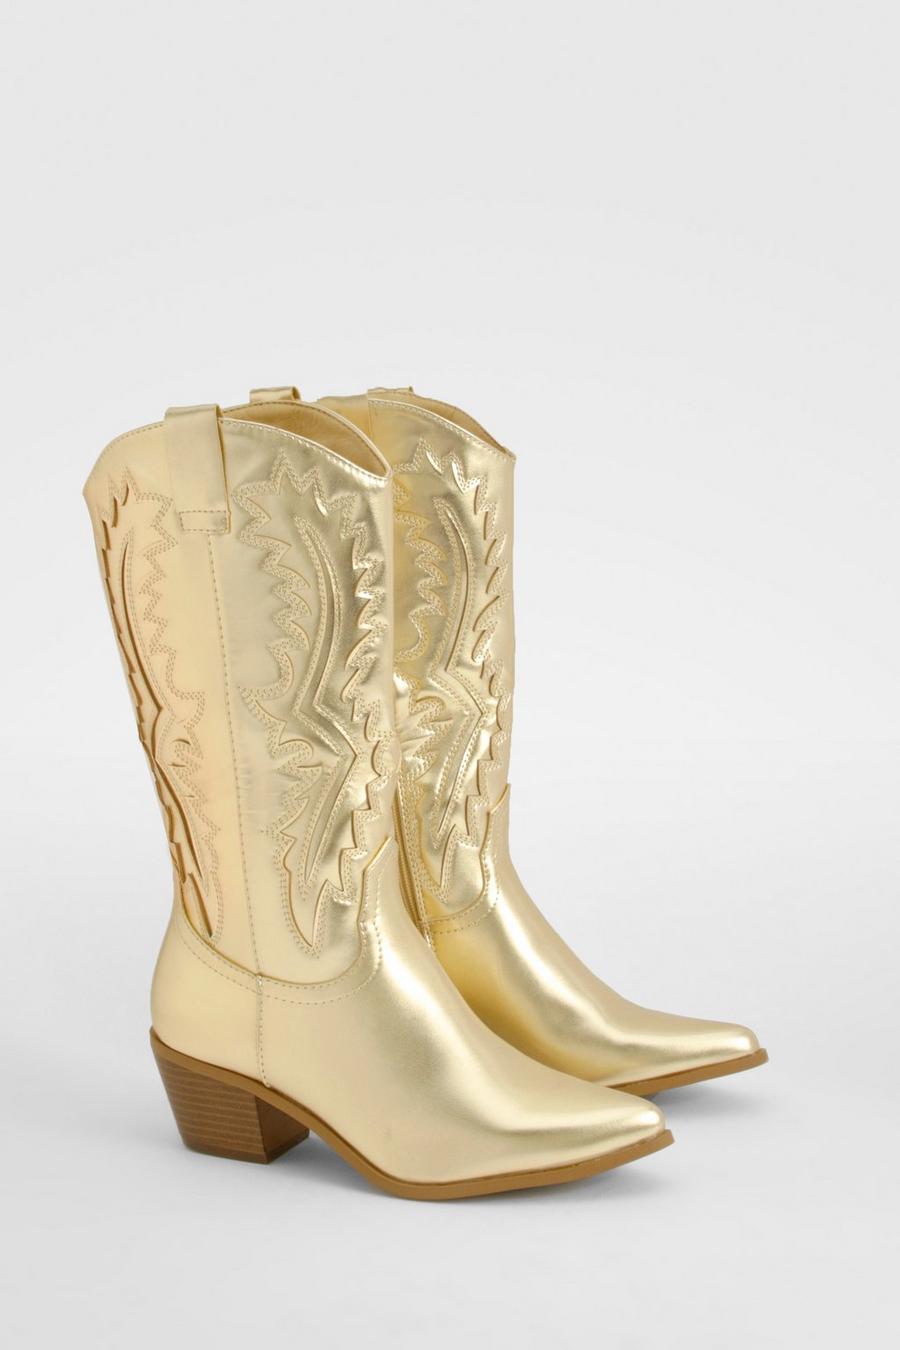 Gold Metallic Embroidered Western Cowboy Boots      